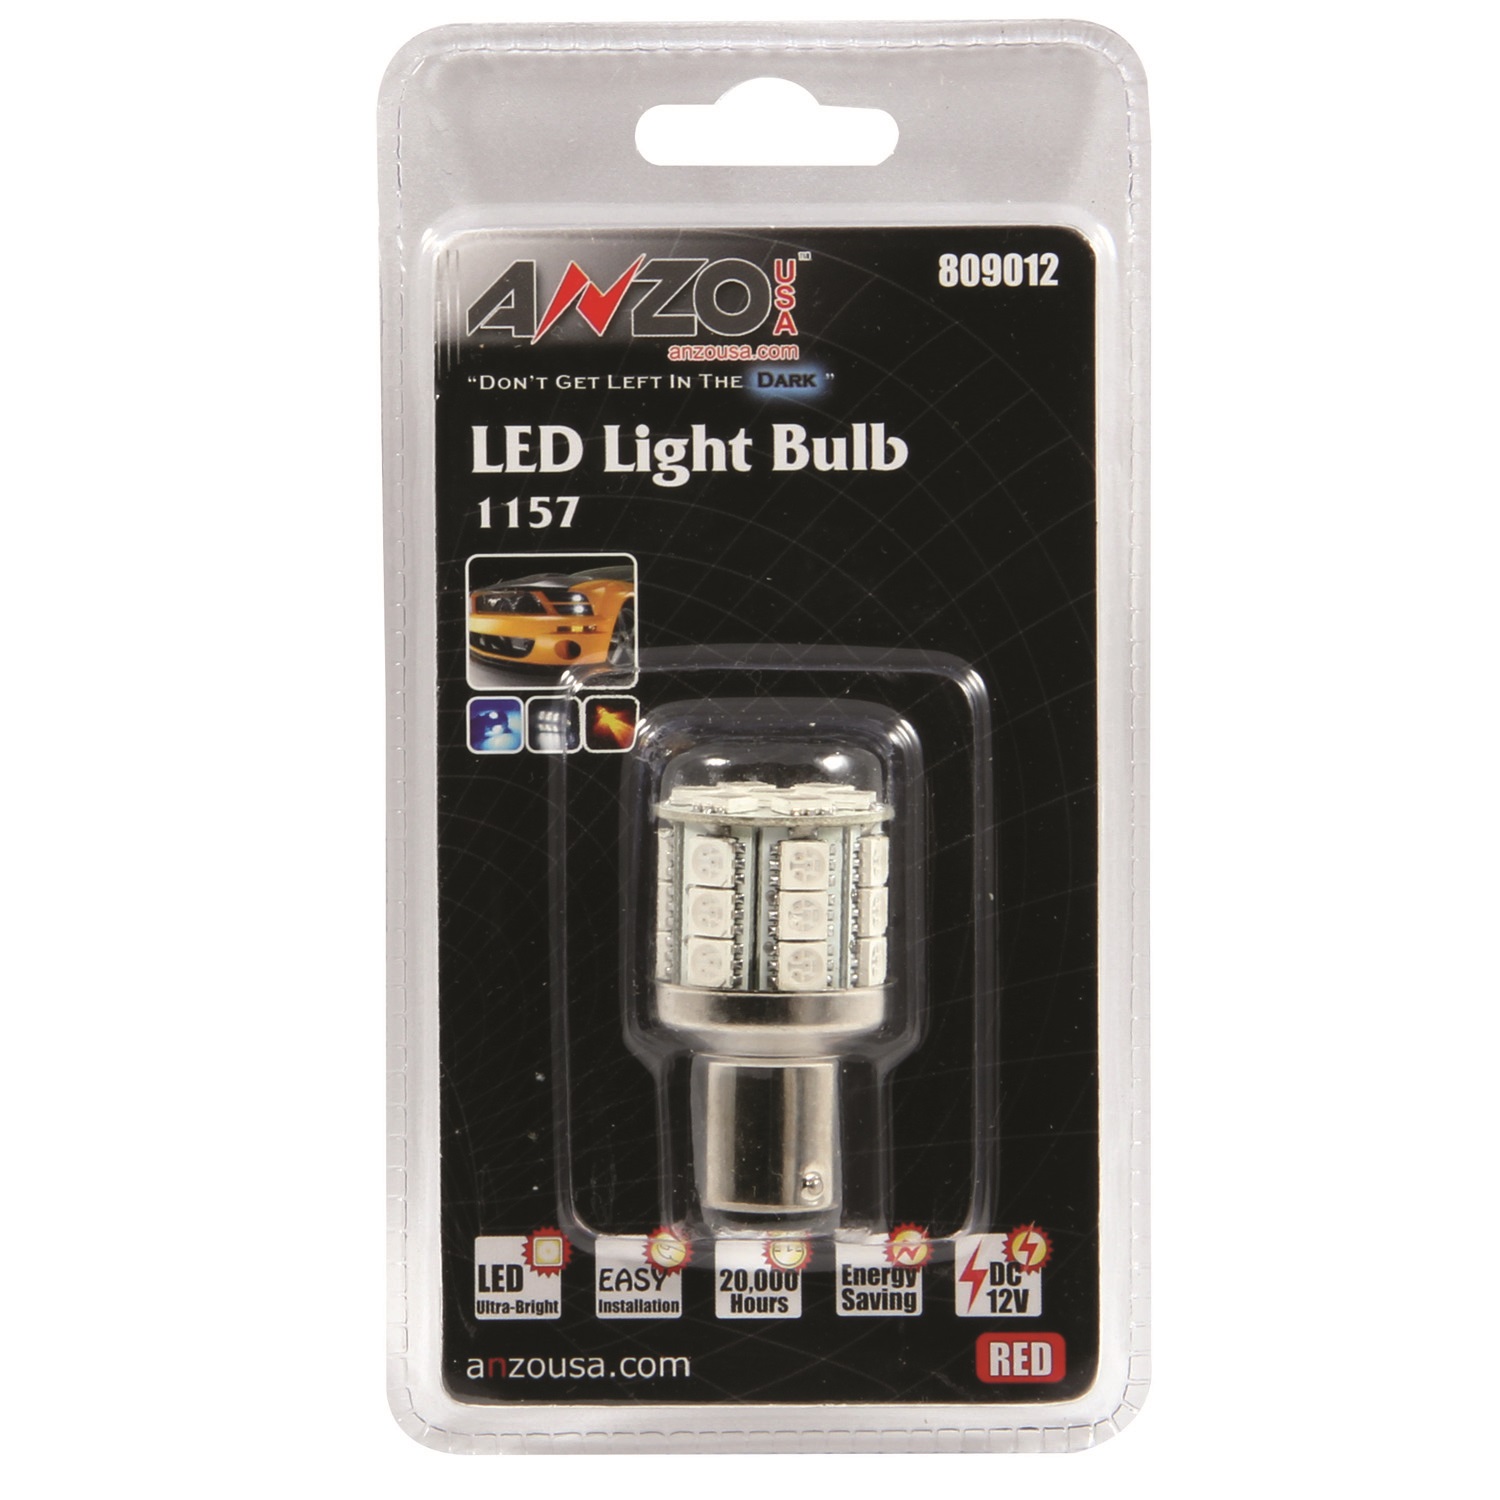 Anzo USA 809012 LED Replacement Bulb